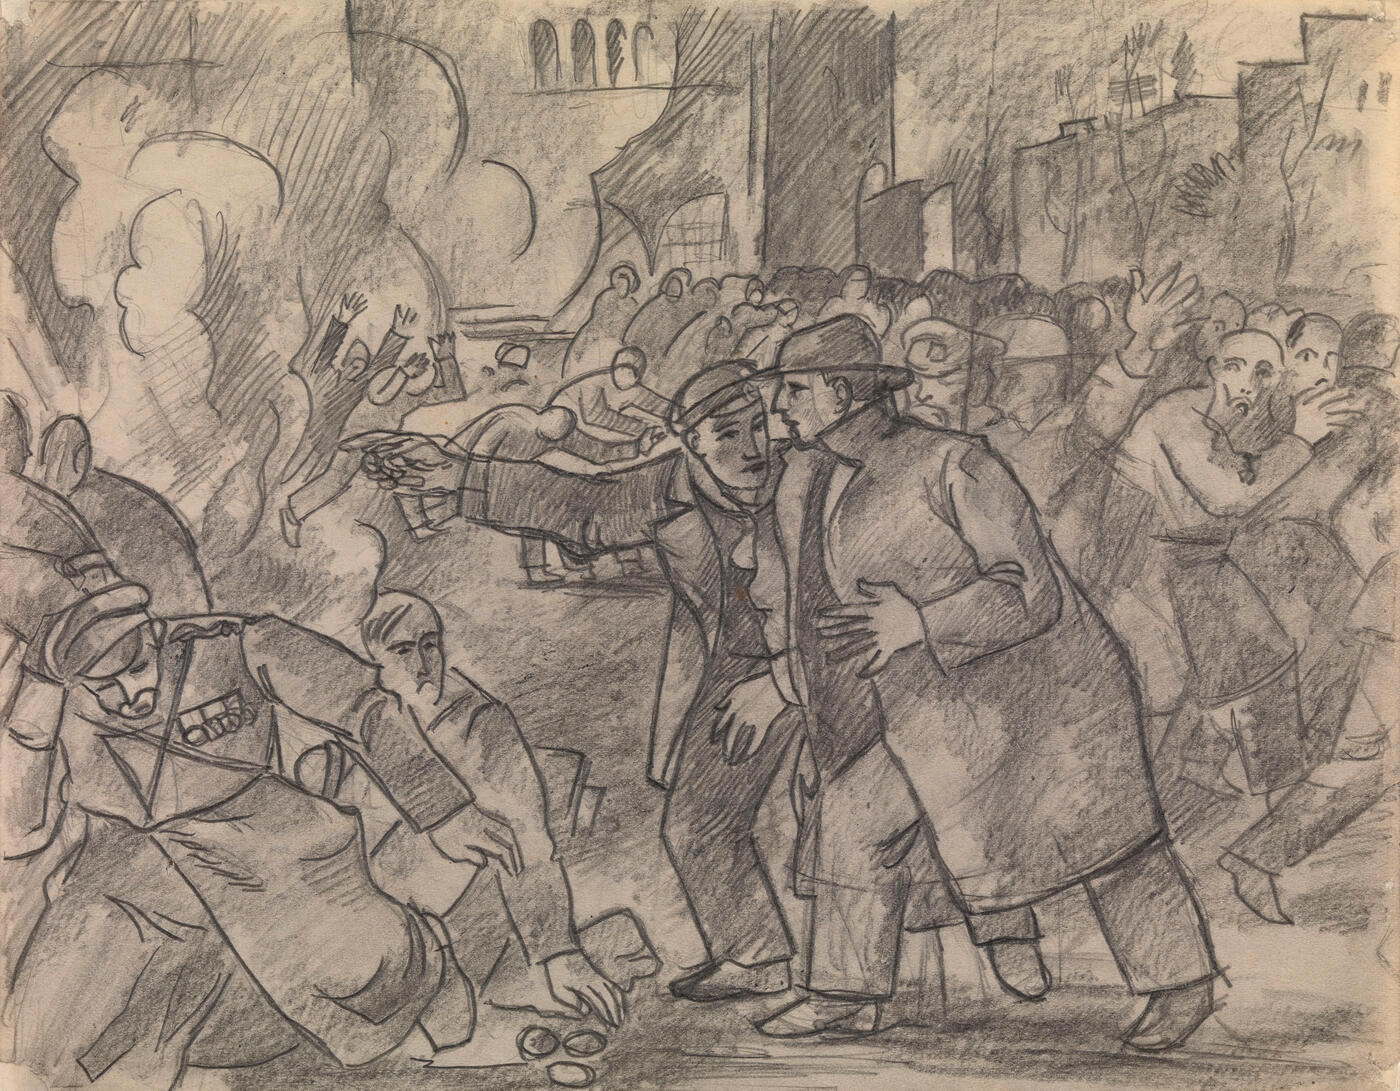 Street Riot, Study for an Illustration.